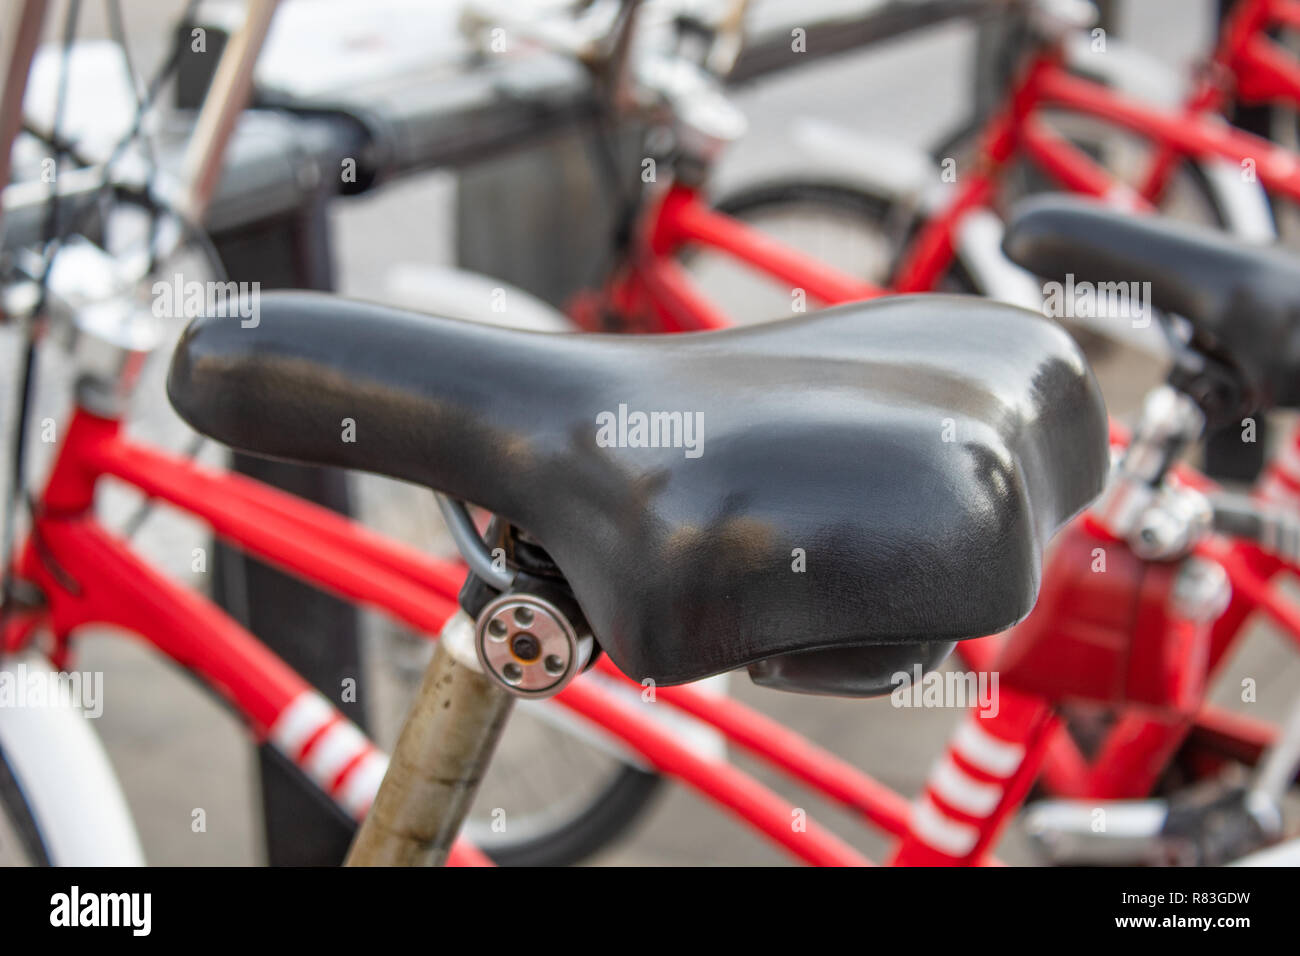 Bicycle saddle close-up of red bikes in the city Stock Photo